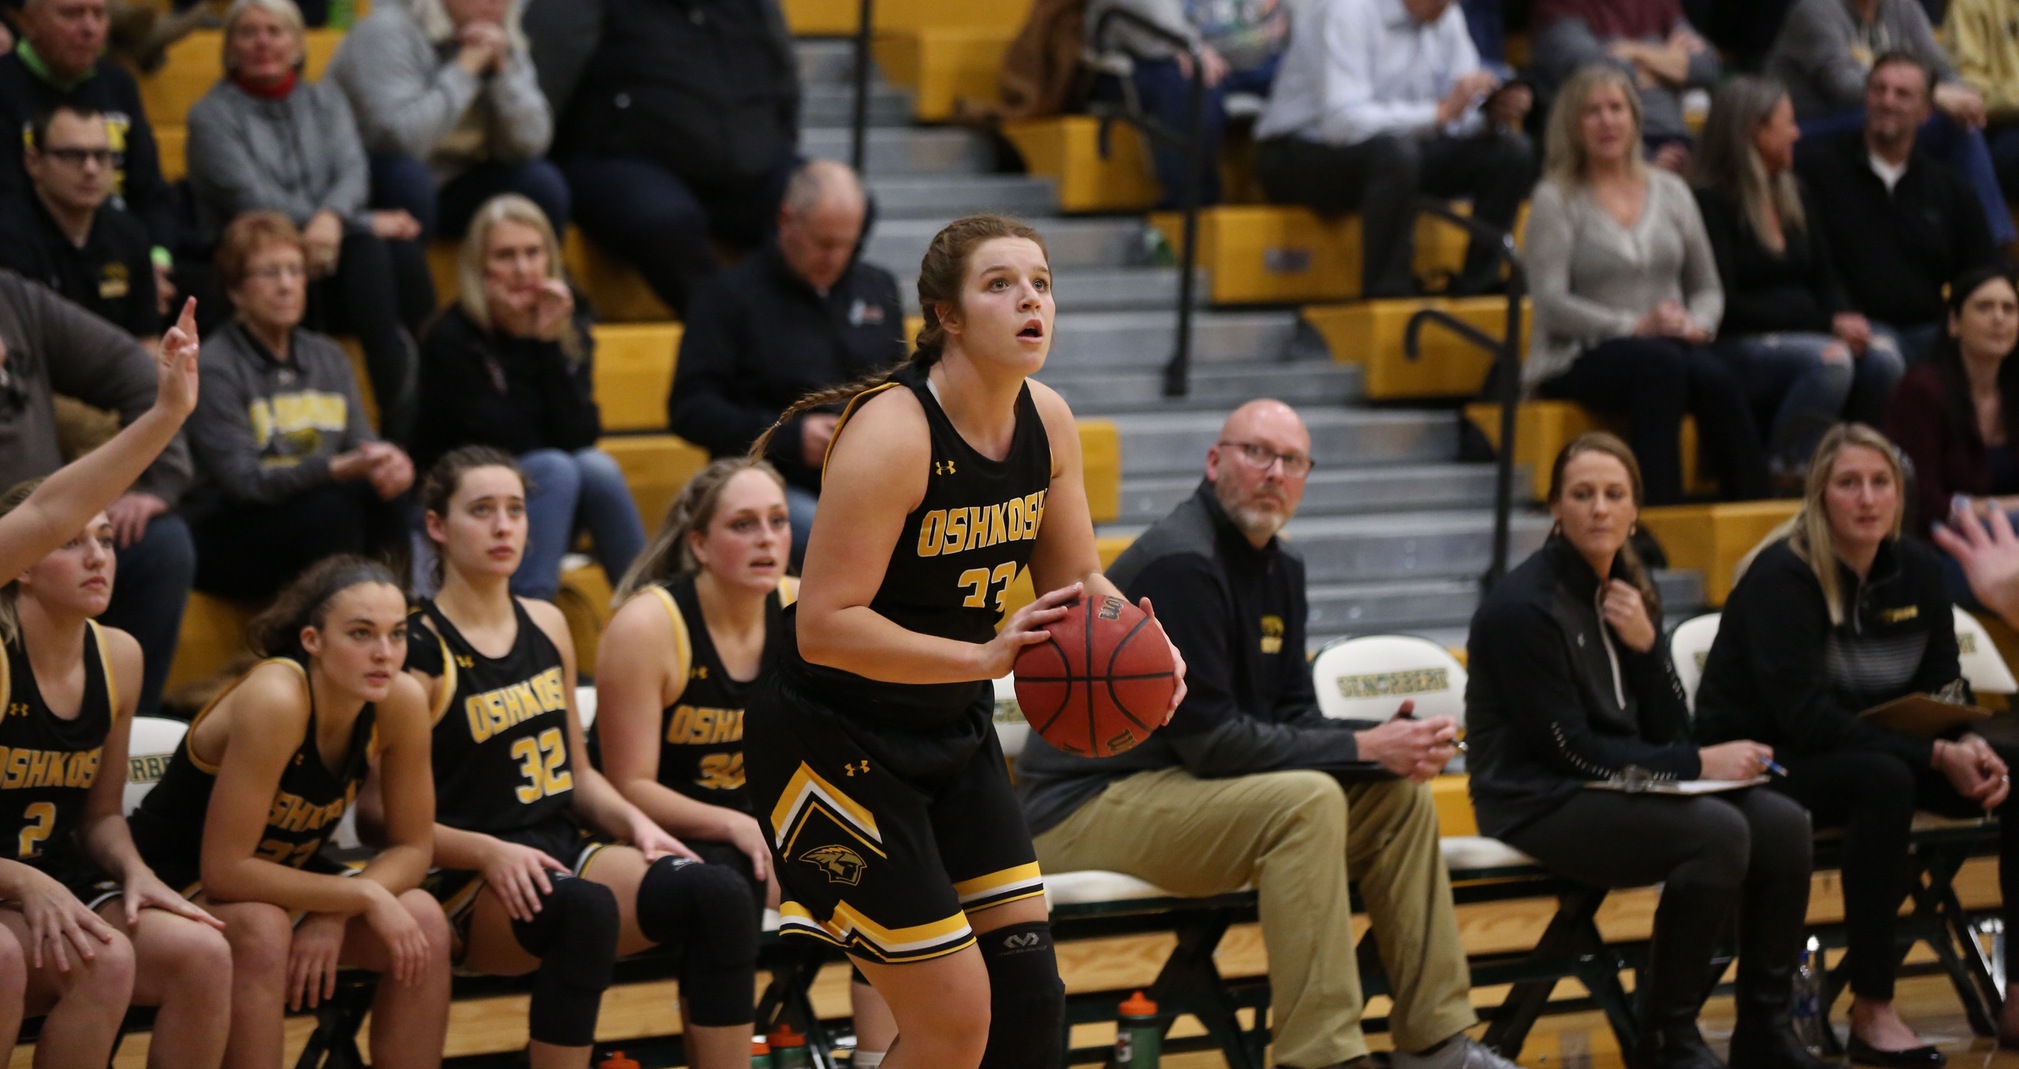 Nikki Arneson led the Titans to their fifth straight win over St. Norbert College by totaling 20 points and eight rebounds.